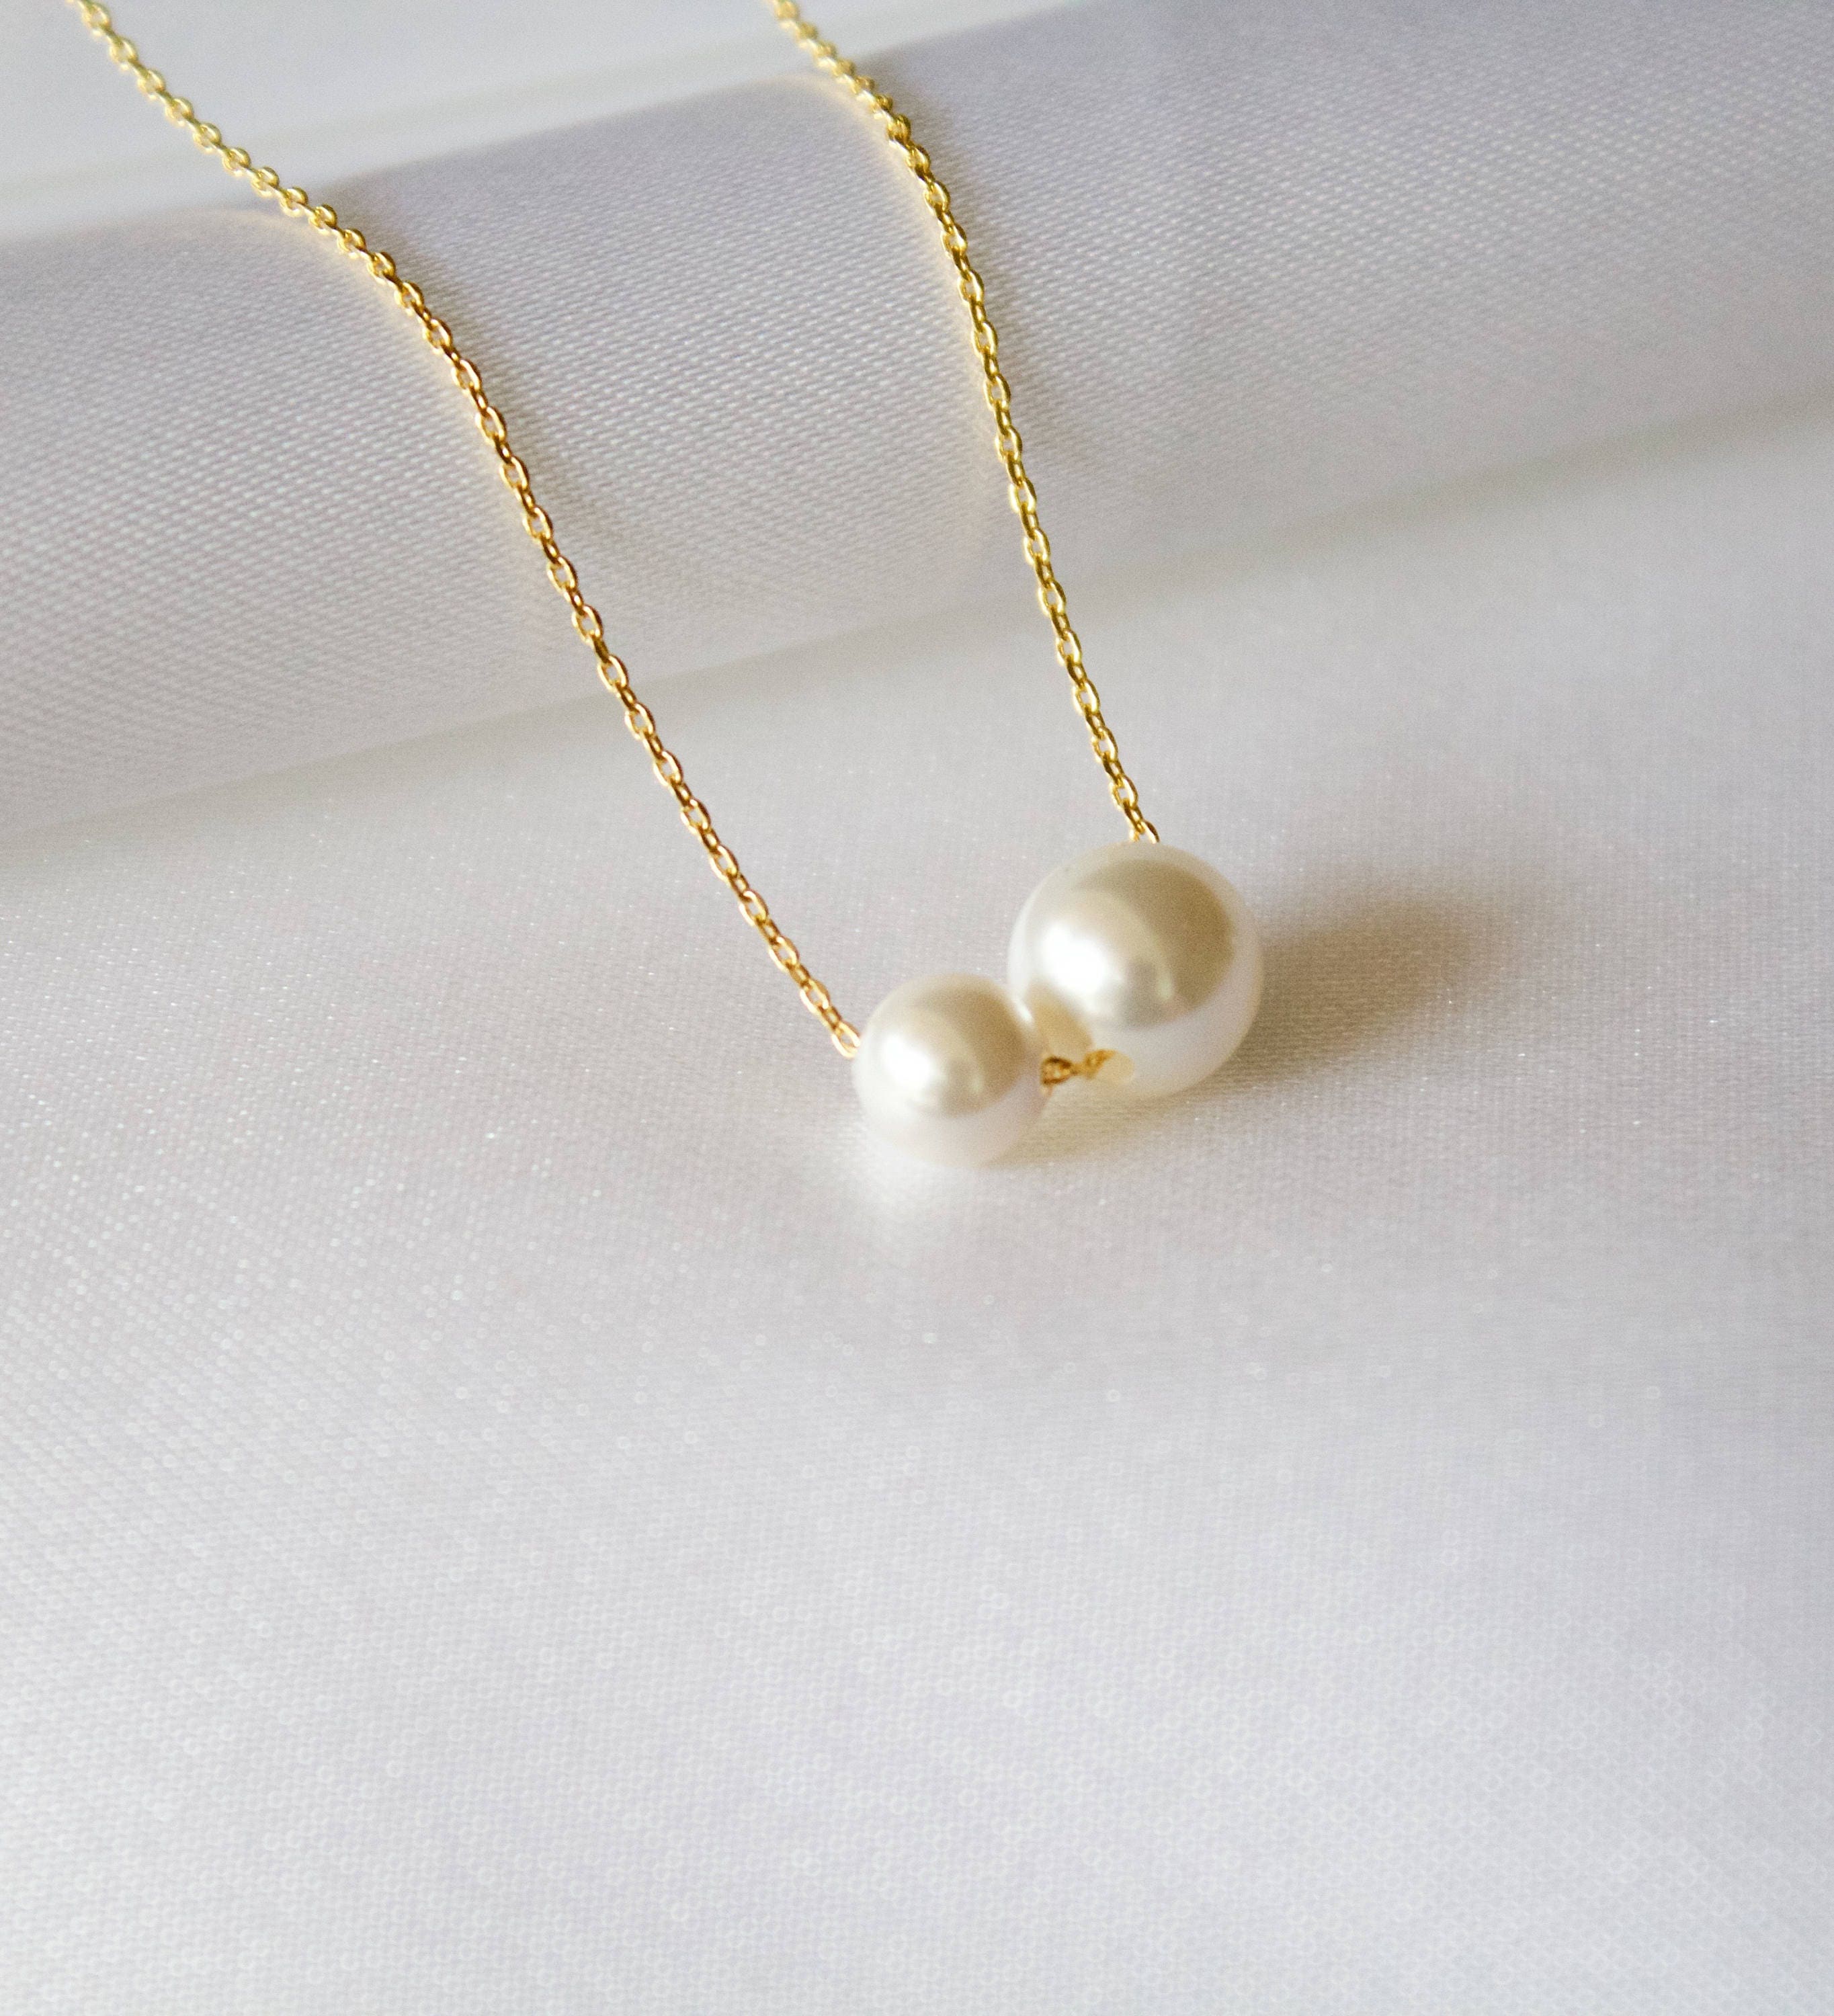 Two Pearls Necklace//bridesmaid Gift//gift for - Etsy